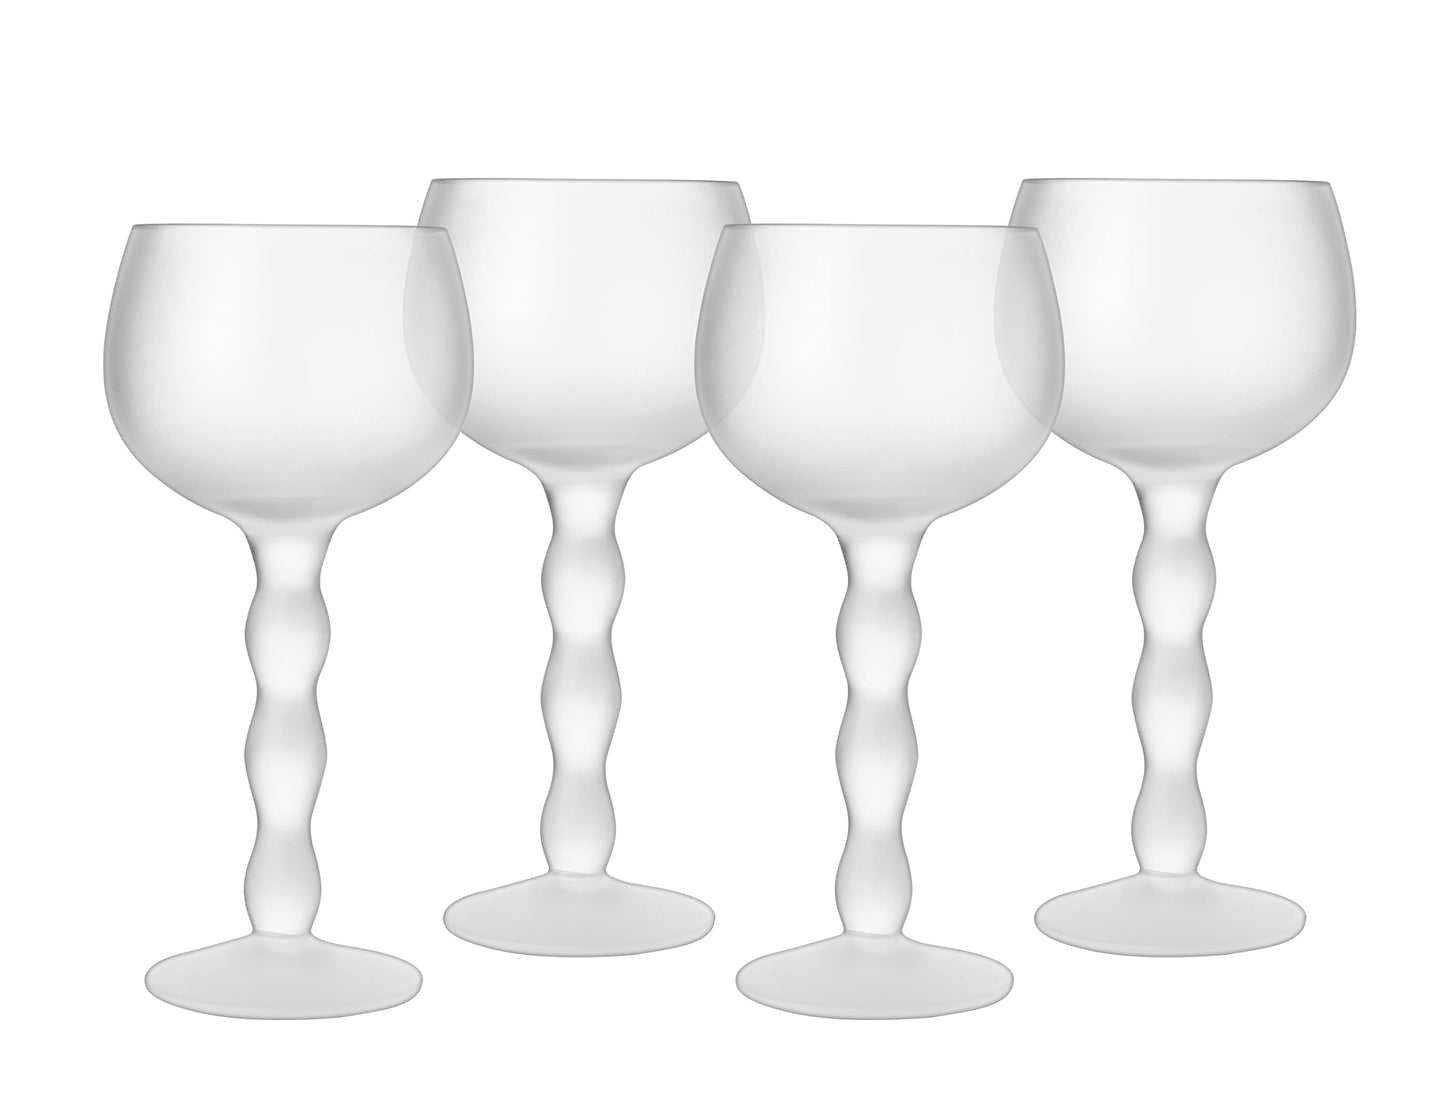 Luna Frosted Wine Glassware, Set of 4